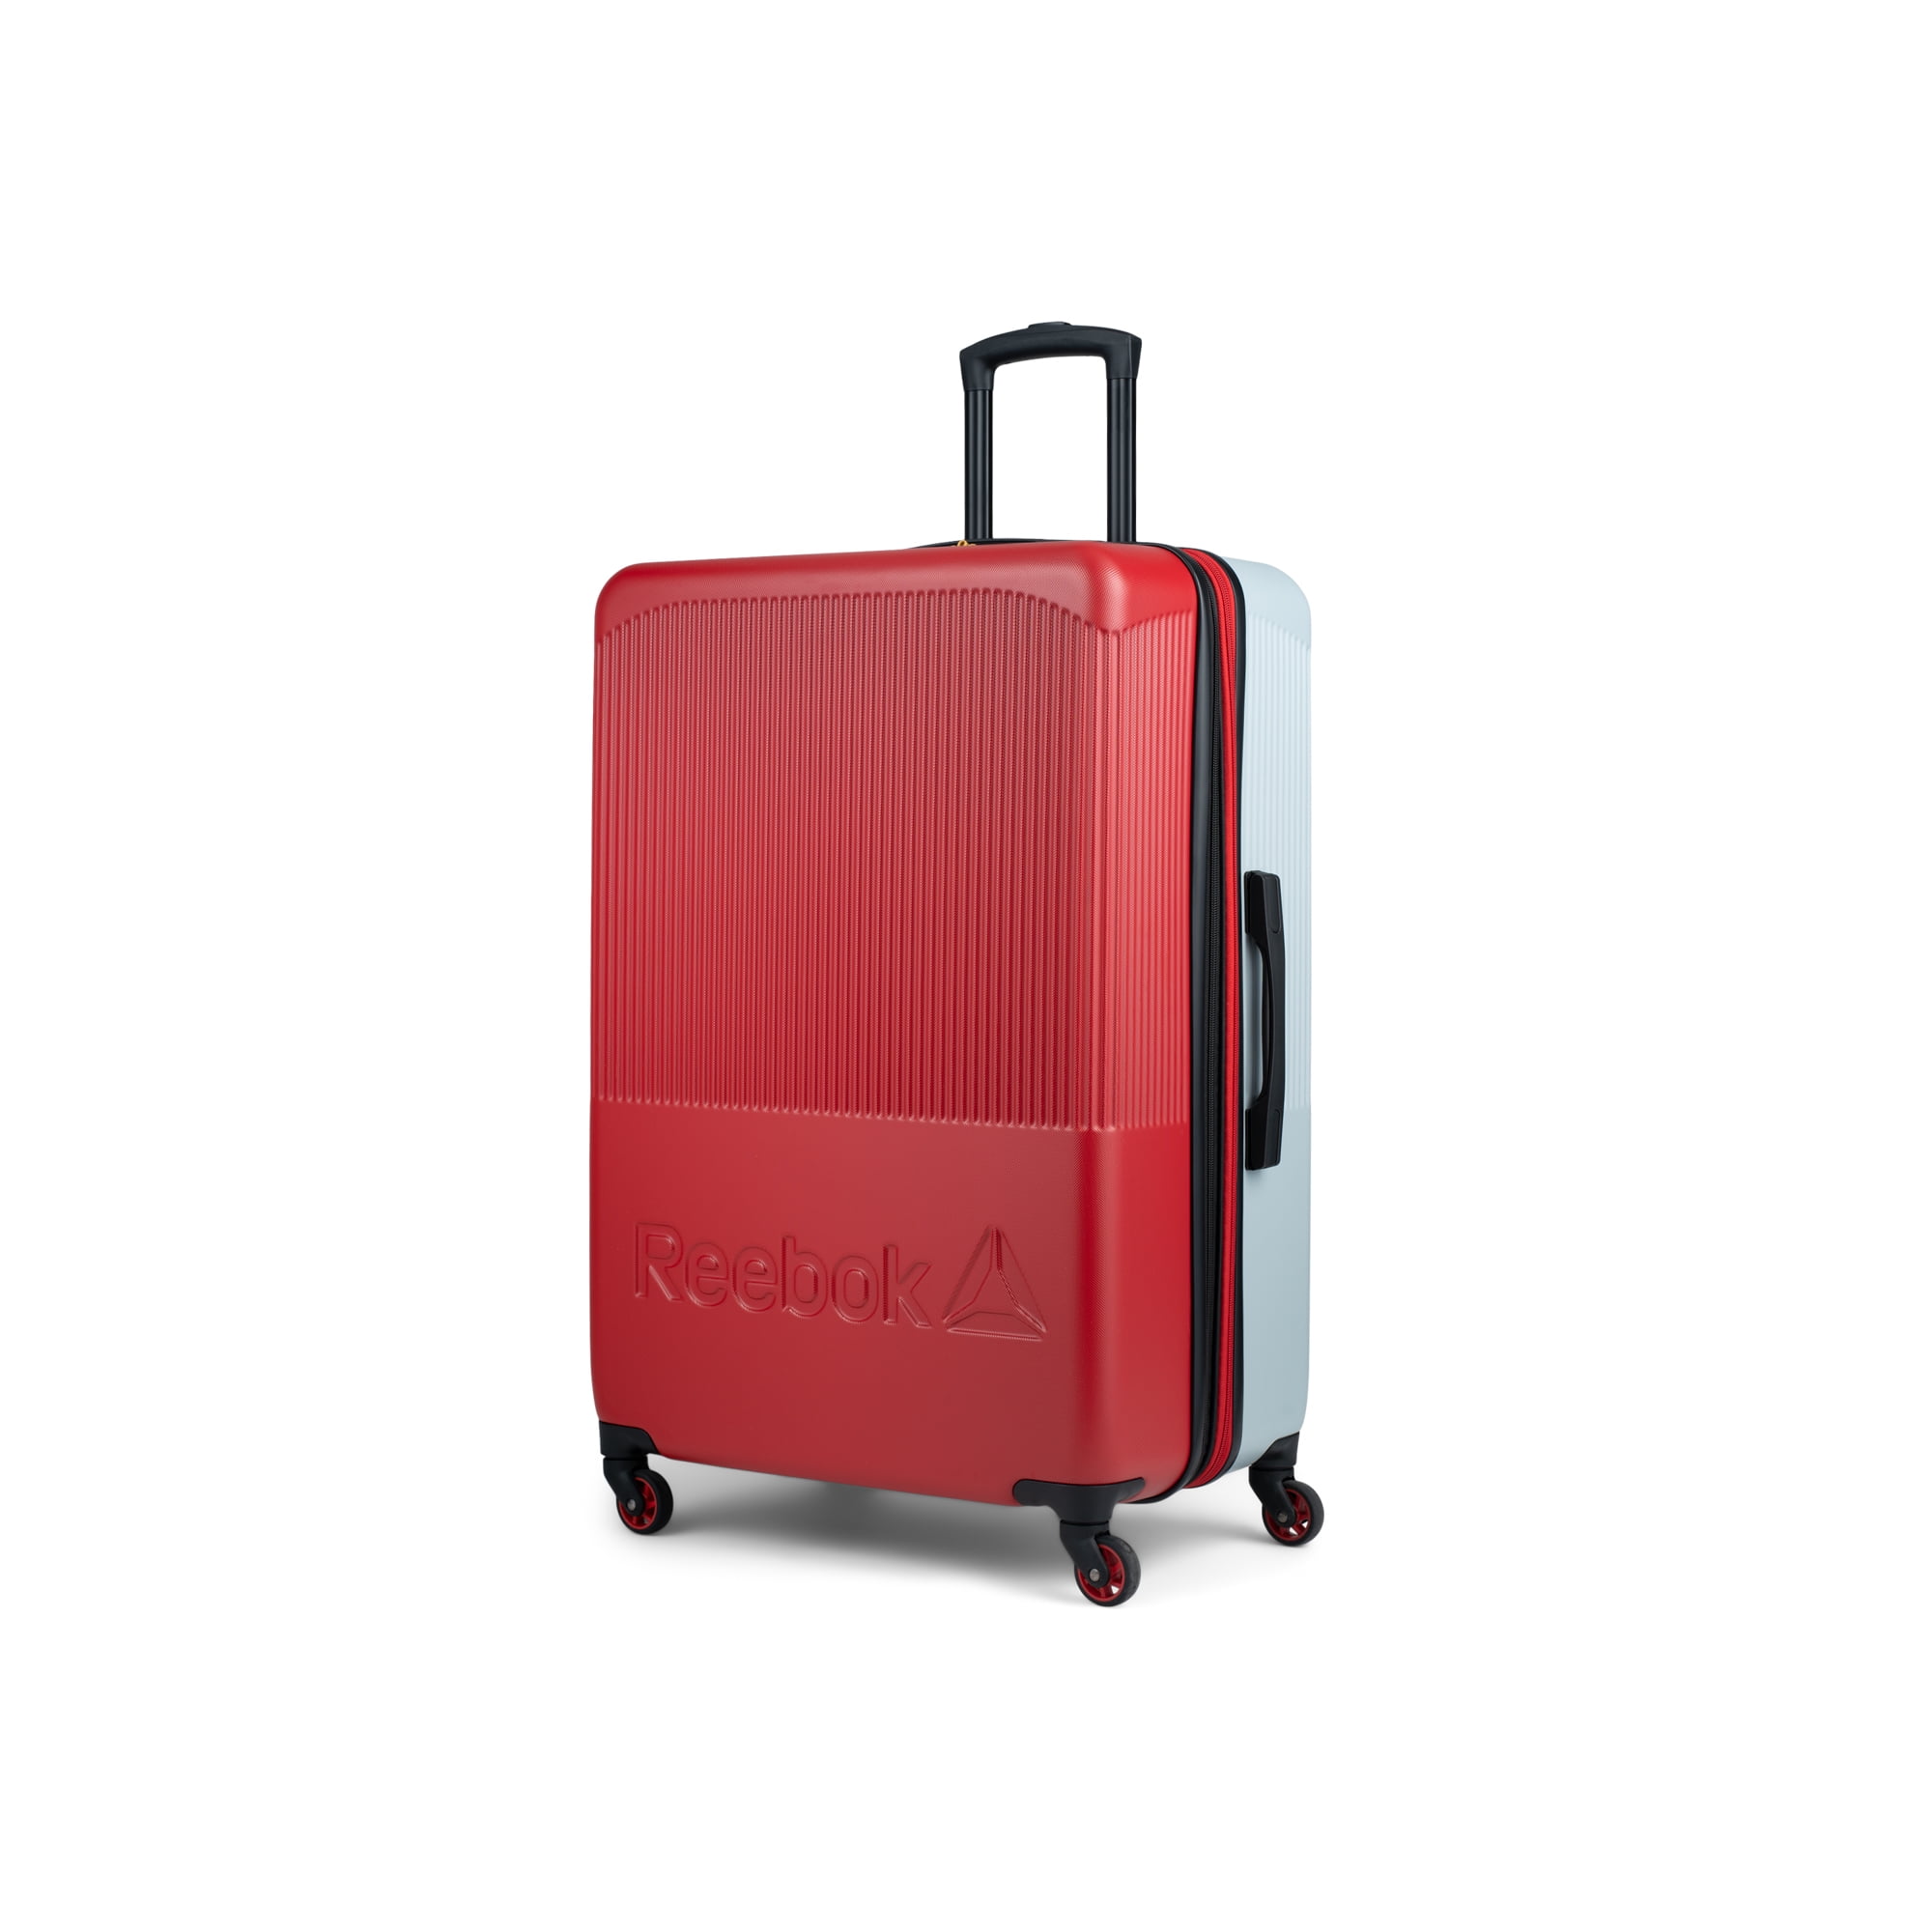 Reebok - Time Out Collection - 28-inch Hardside Luggage - ABS/PC ...